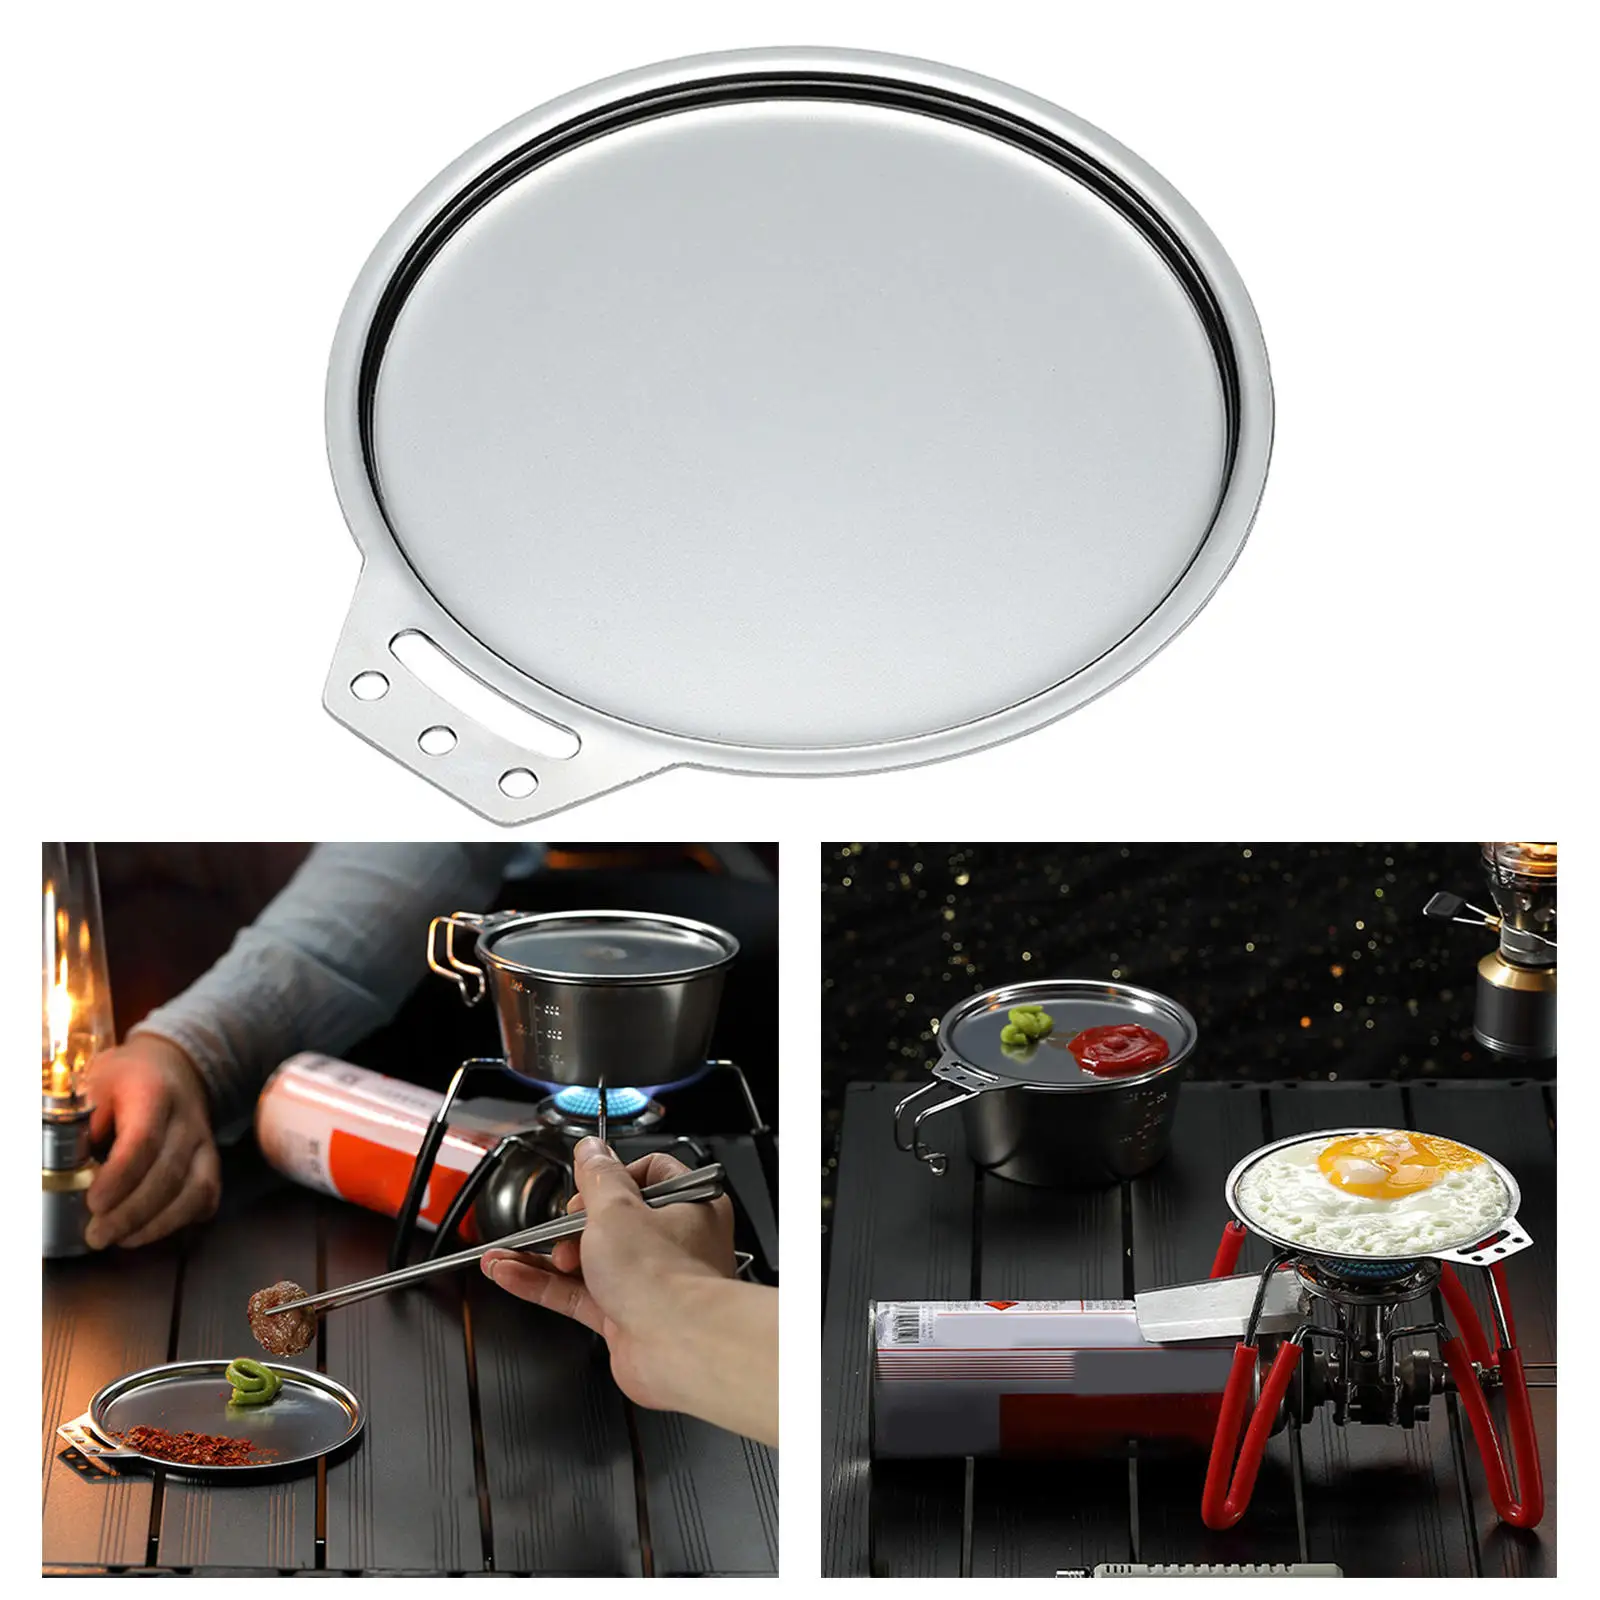 Outdoor Stainless Steel Cup Bowl Dish Cover Flatware Cookware Cookwear for Camping Picnic Travel Barbecue Fishing Hiking Cooking